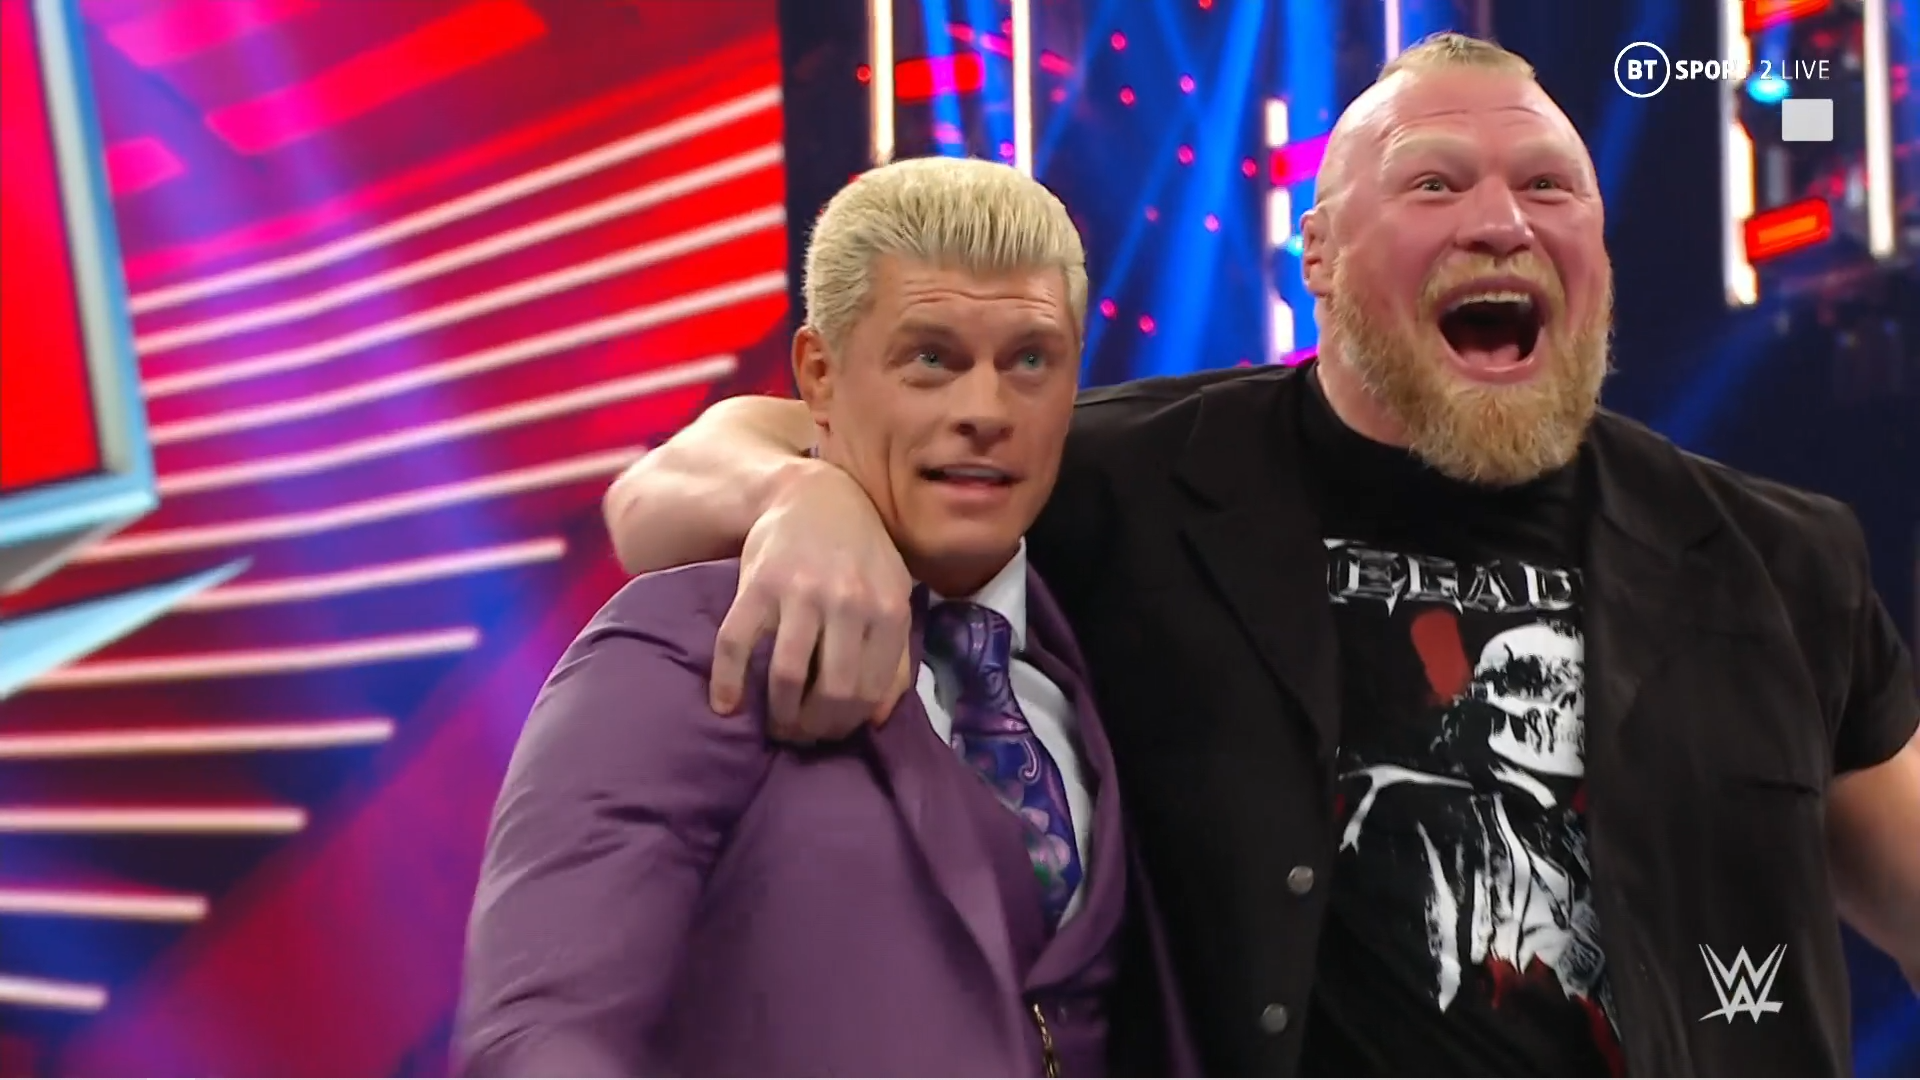 Cody Rhodes and Brock Lesnar team up together on Monday Night Raw, against Roman Reigns and Solo Sikoa